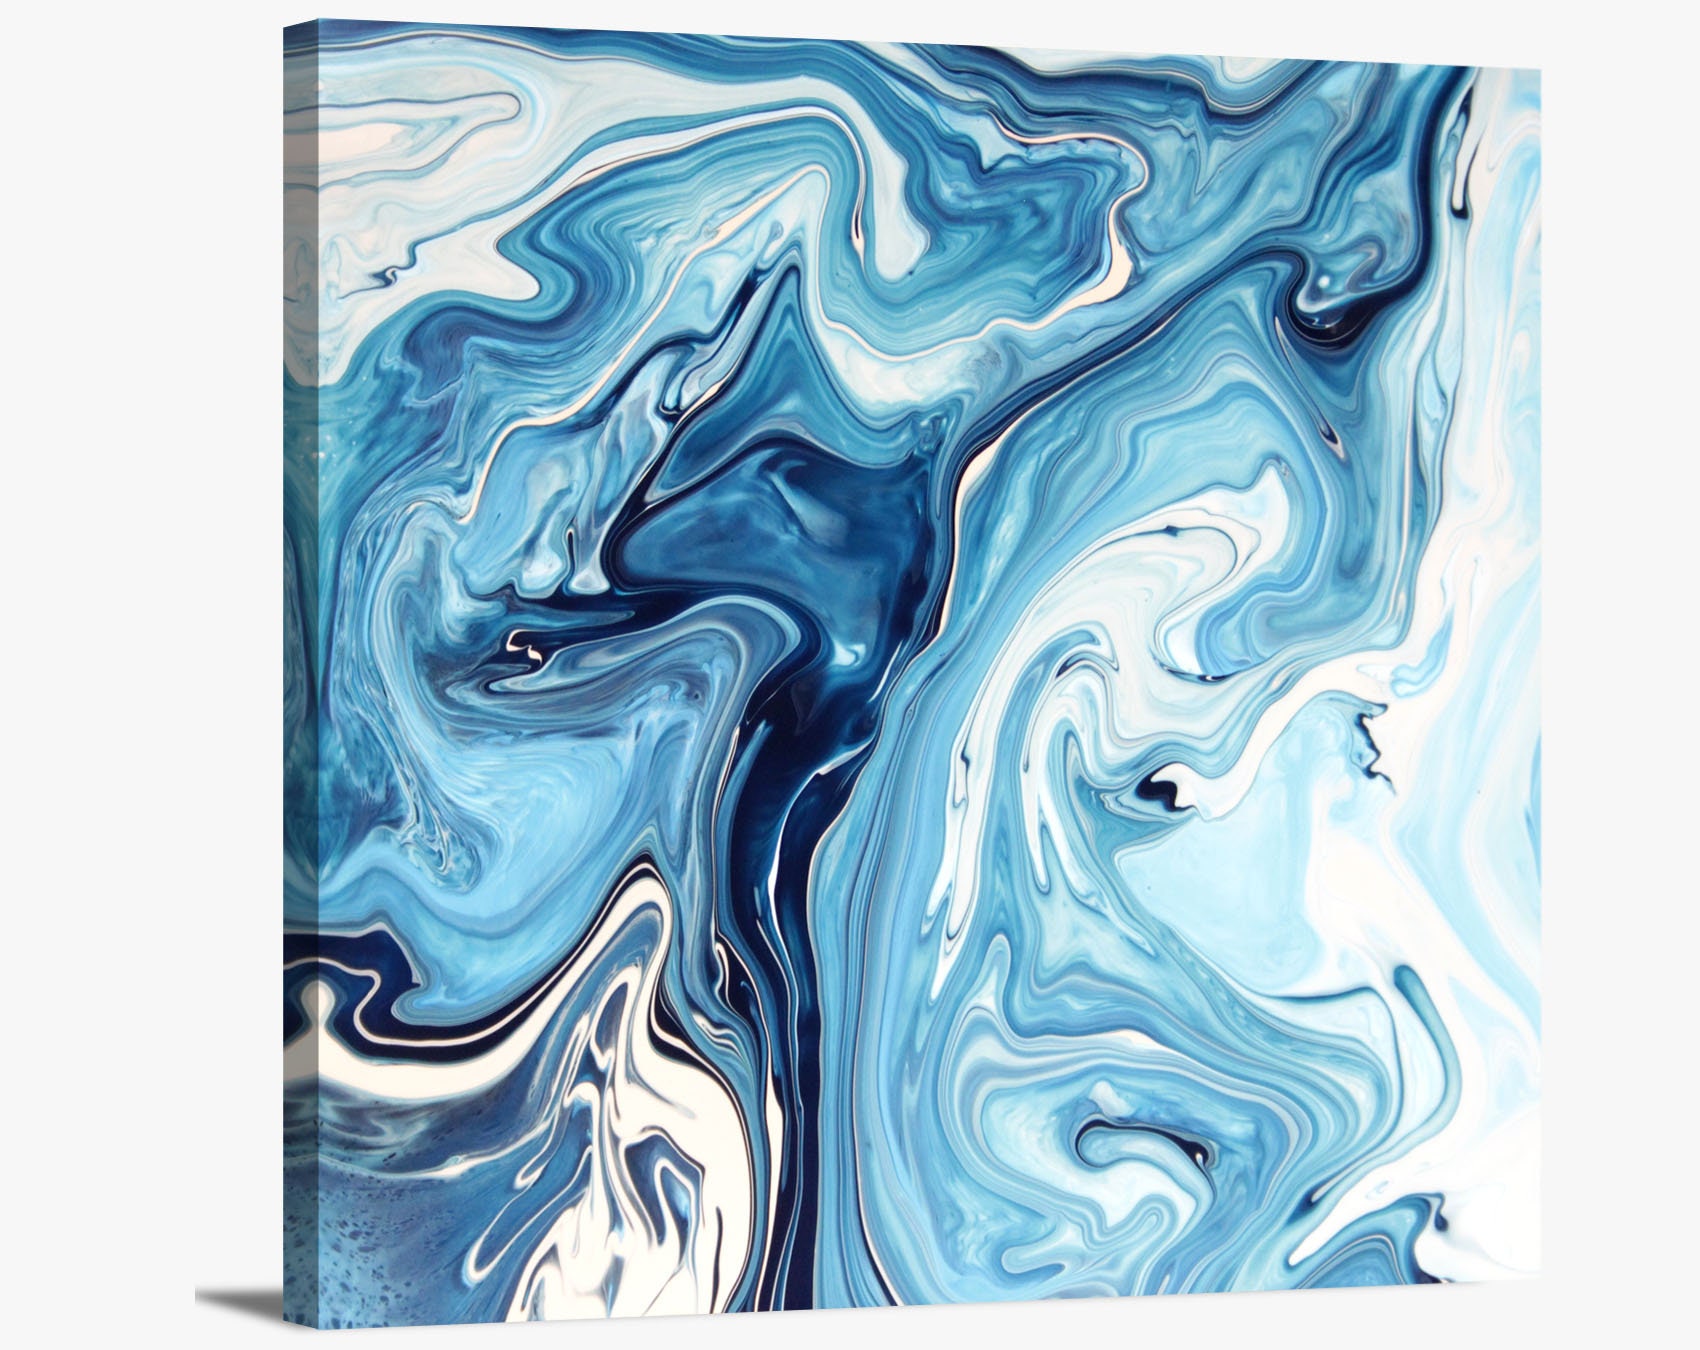 Blue Marble Art Water Abstract Liquid Painting Modern Pattern Texture  Artwork Framed Canvas Print Wall Art Office Decor Home Decorations 